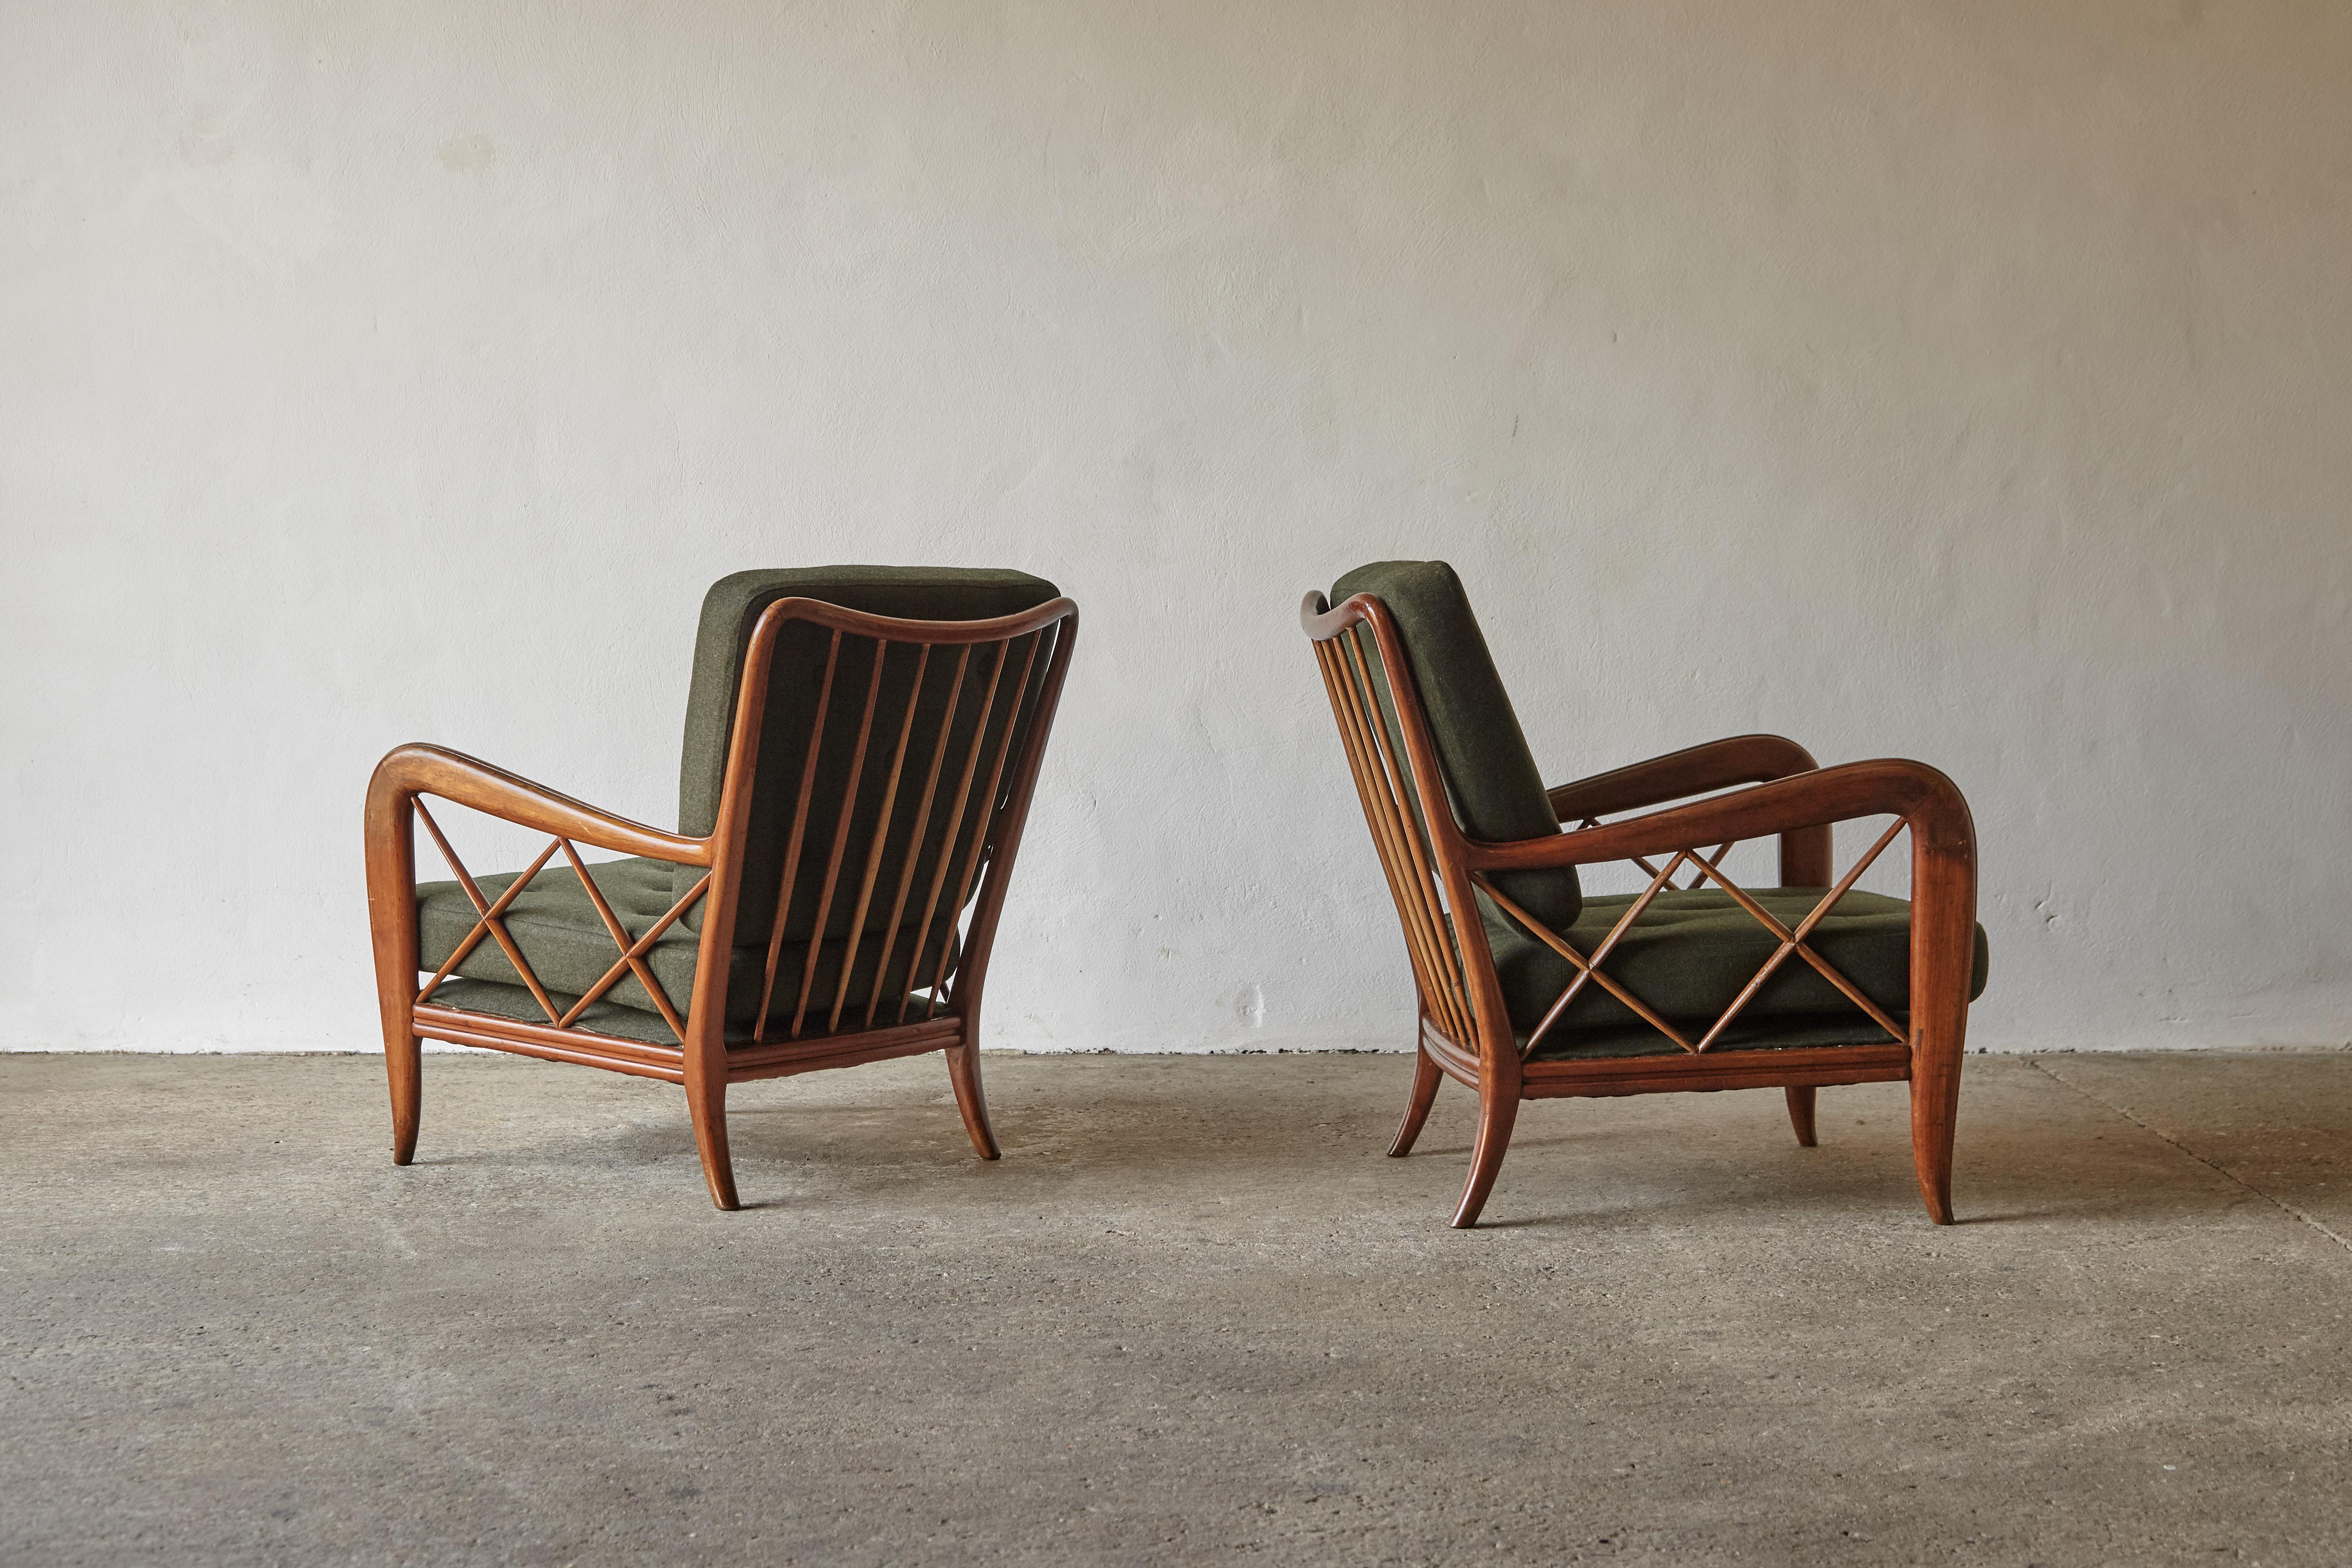 A beautiful pair of Paolo Buffa attributed lounge chairs, Italy, 1950s. The wooden frames are in original condition with signs of age - small dents, marks, a few small repairs. The seat and cushions are newly upholstered in a premium green wool